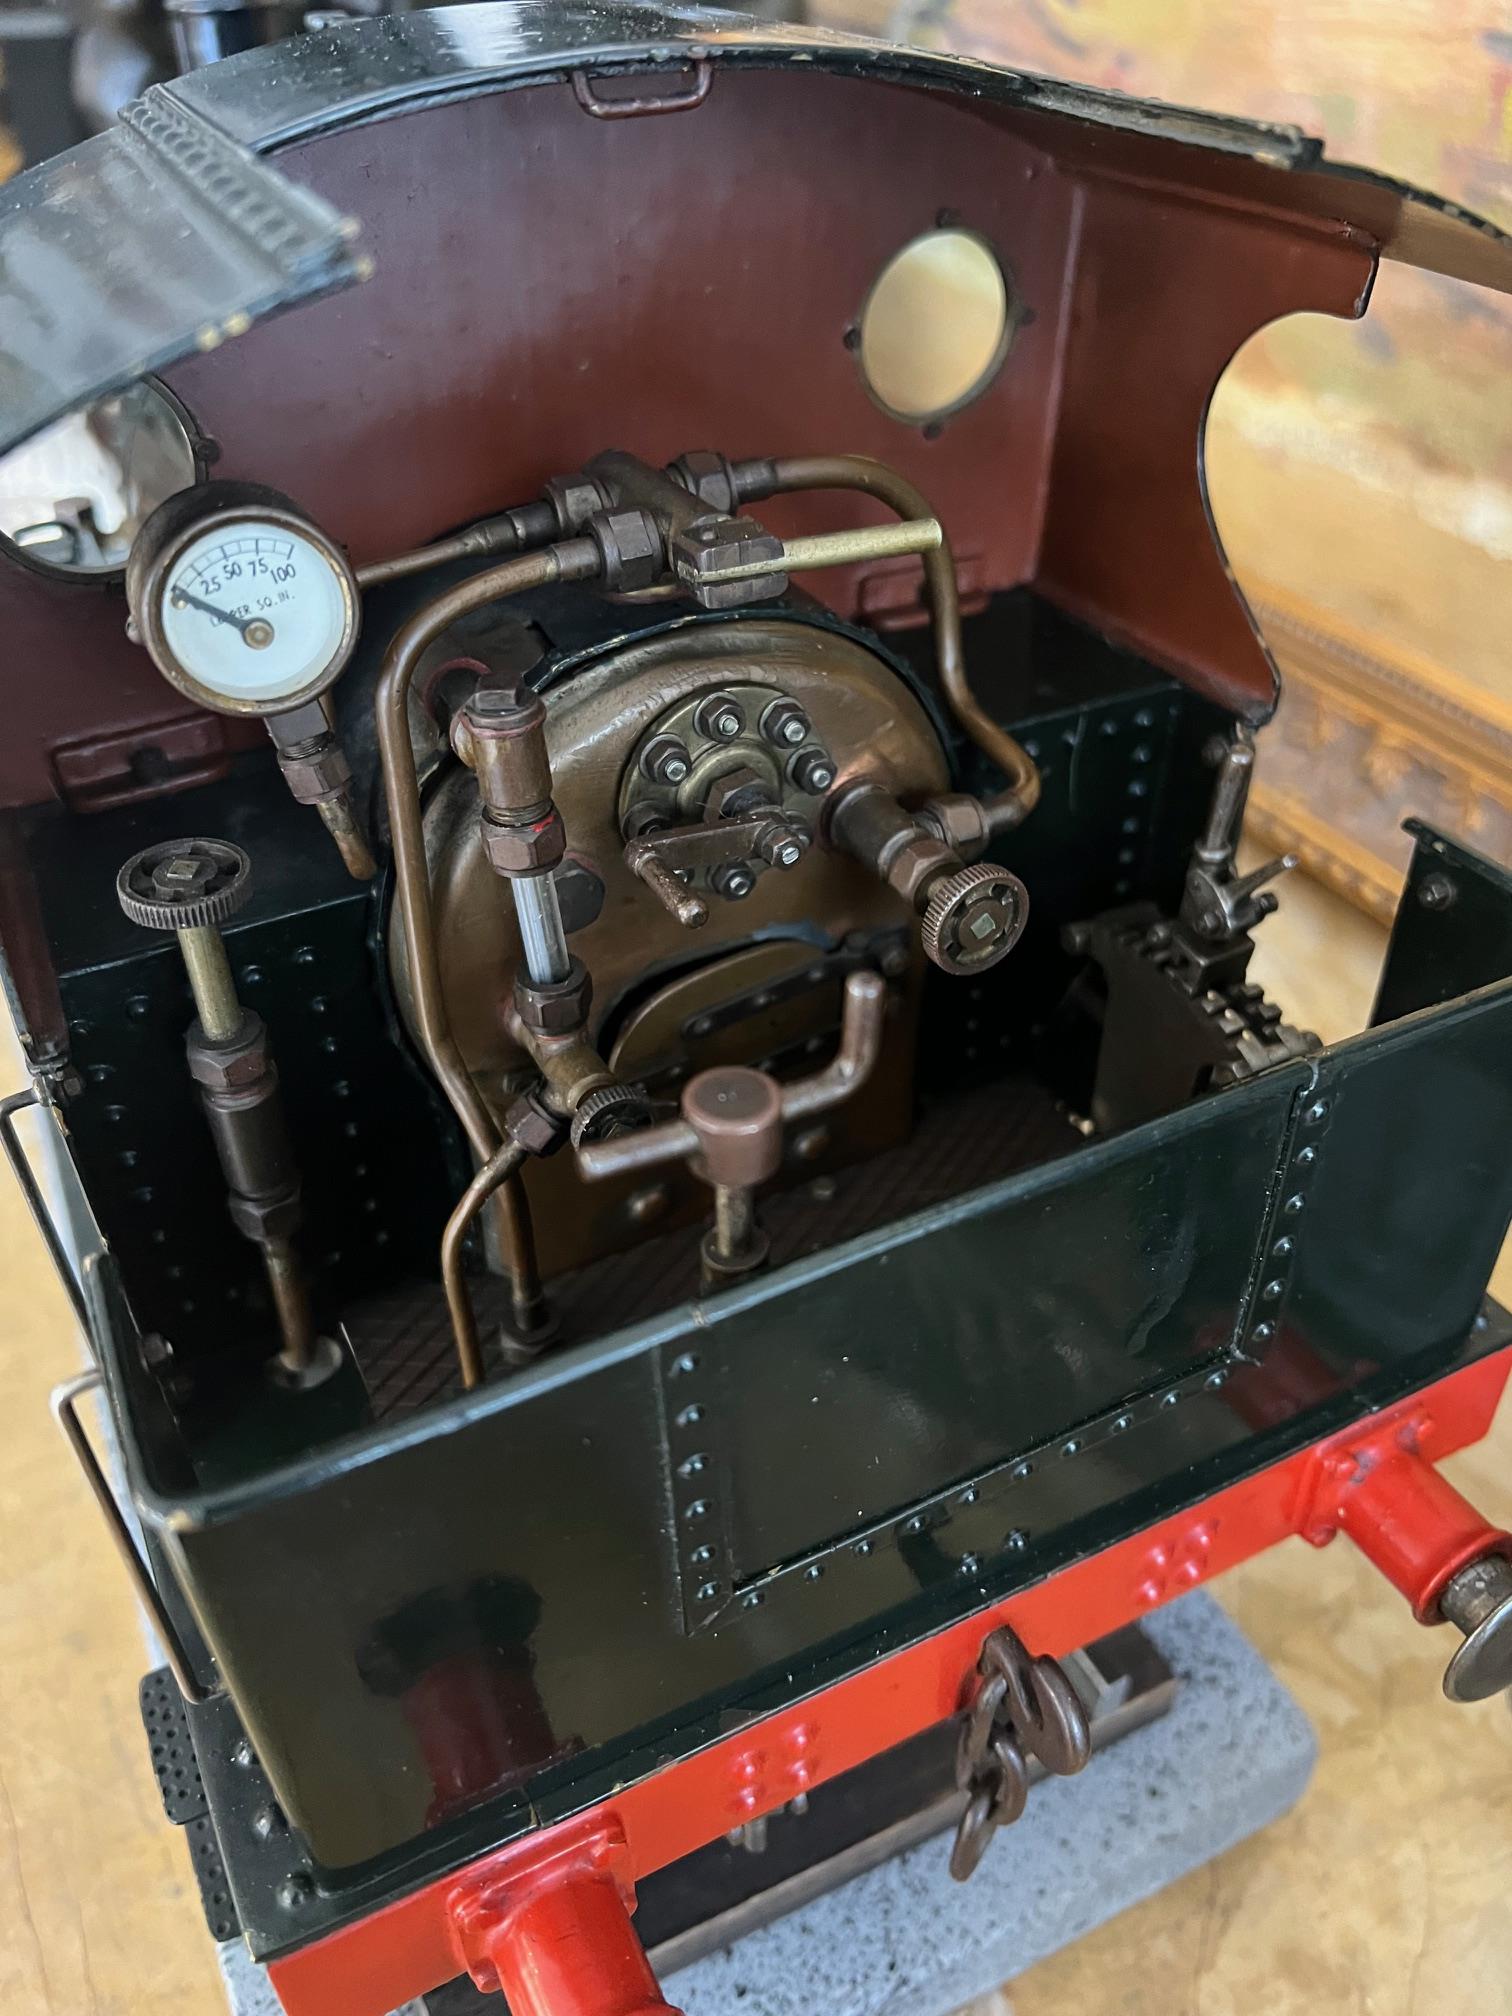 A FULL WORKING MODEL OF A STEAM TRAIN - Image 19 of 45